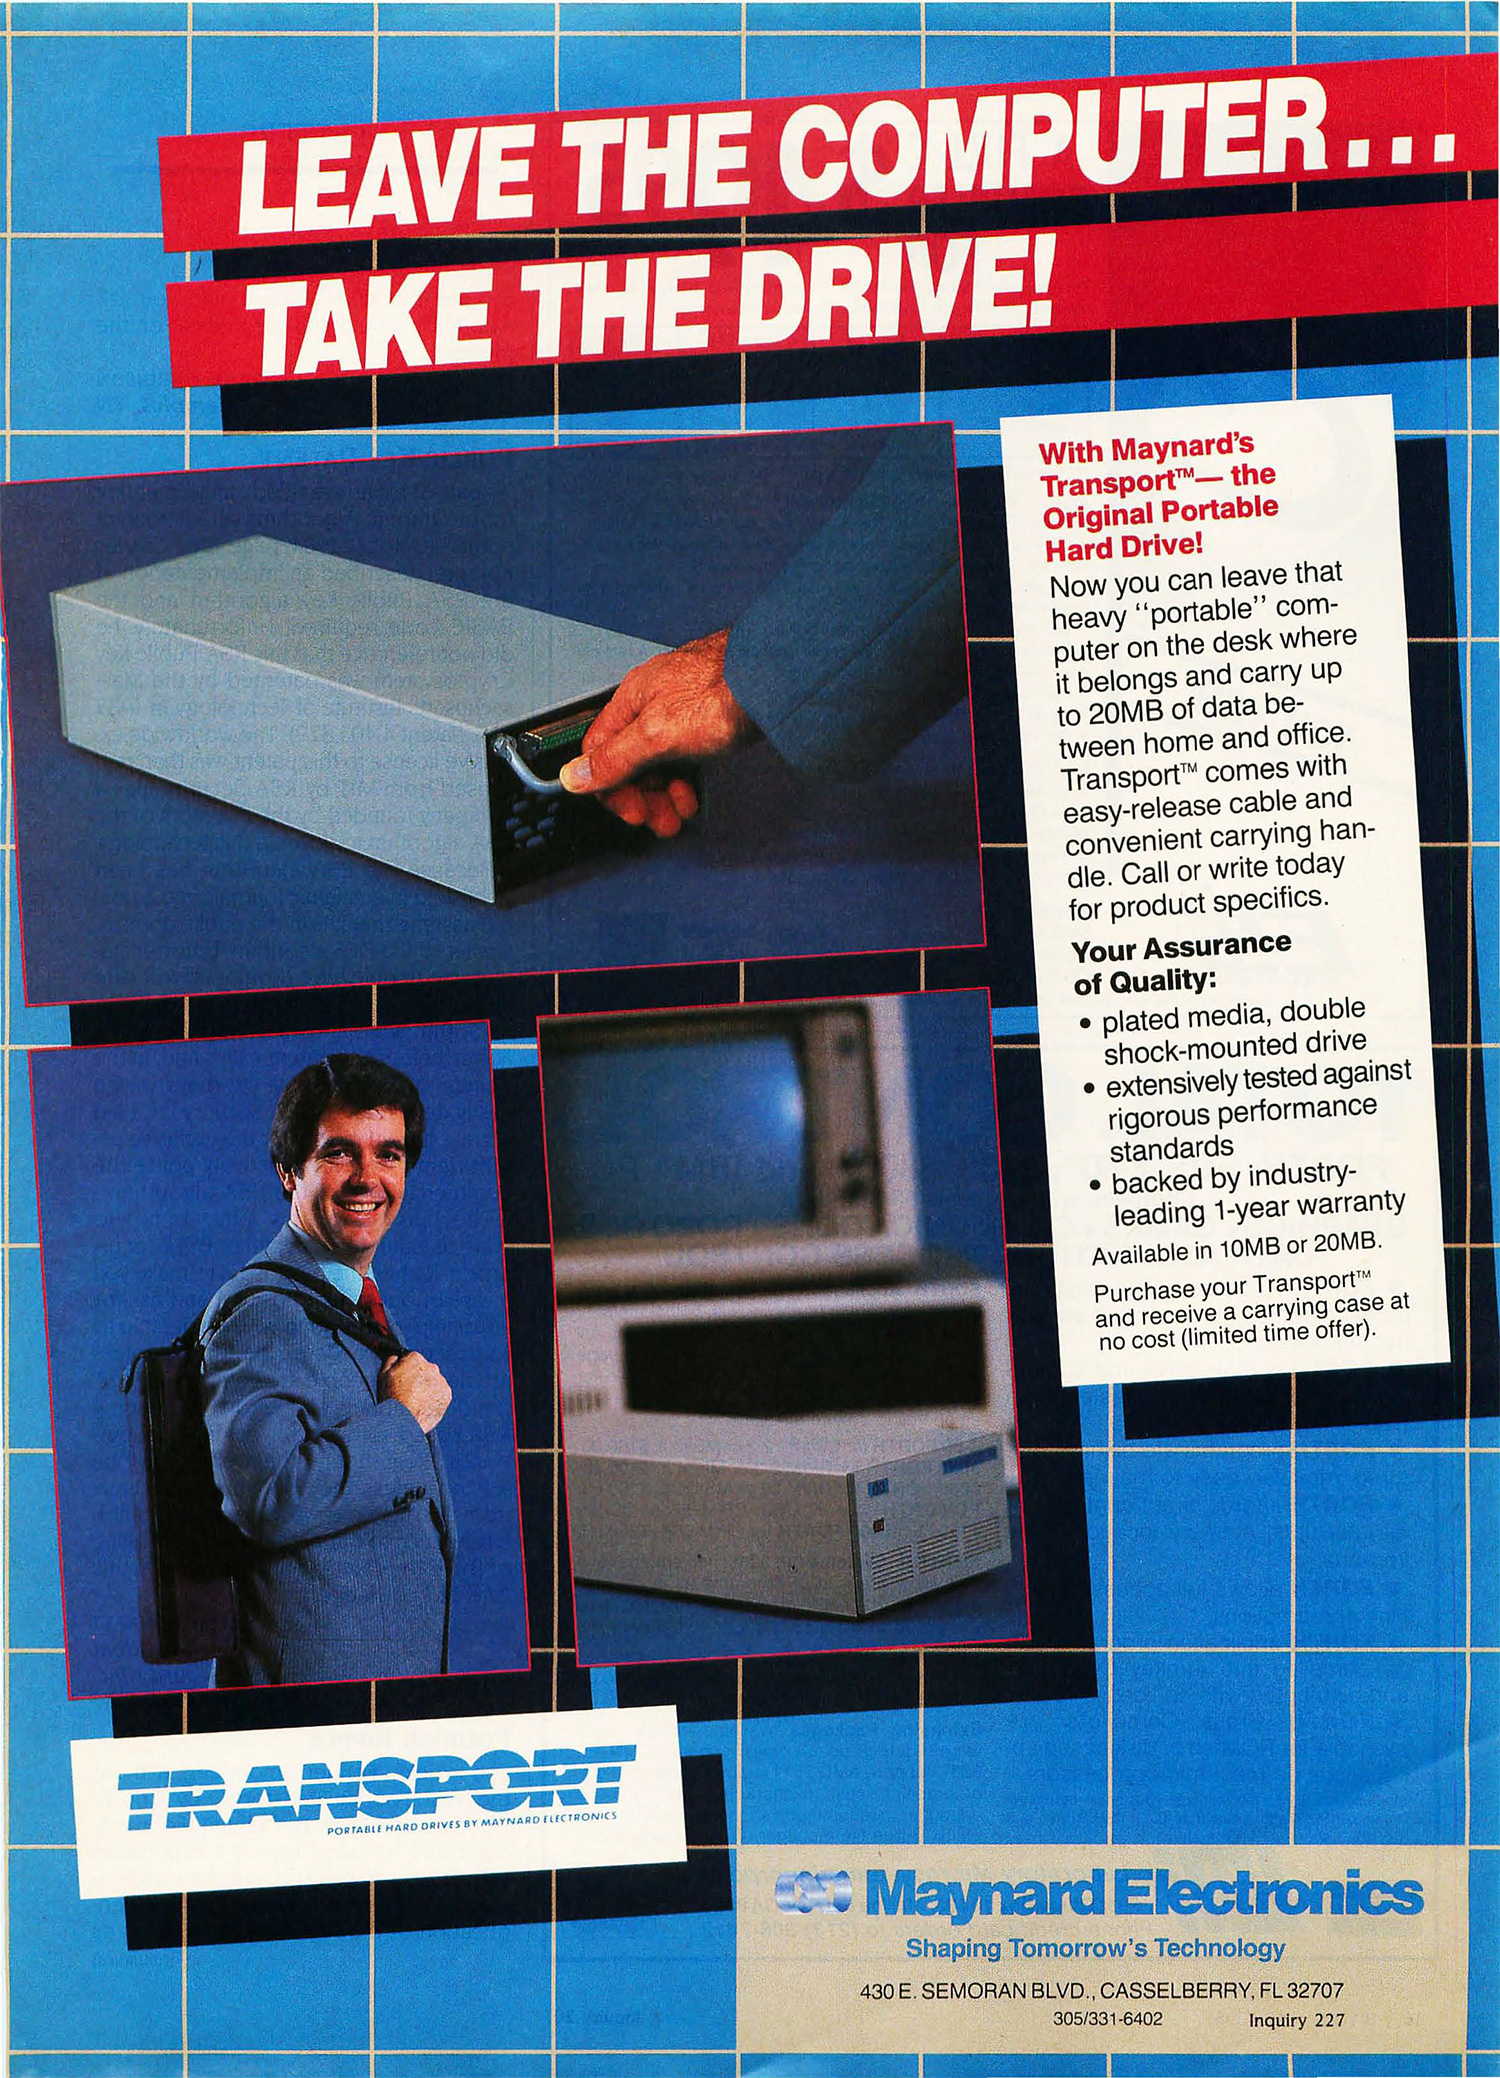 This Was The Portable Hard Drive Of 1985, Clocking In At 20MB